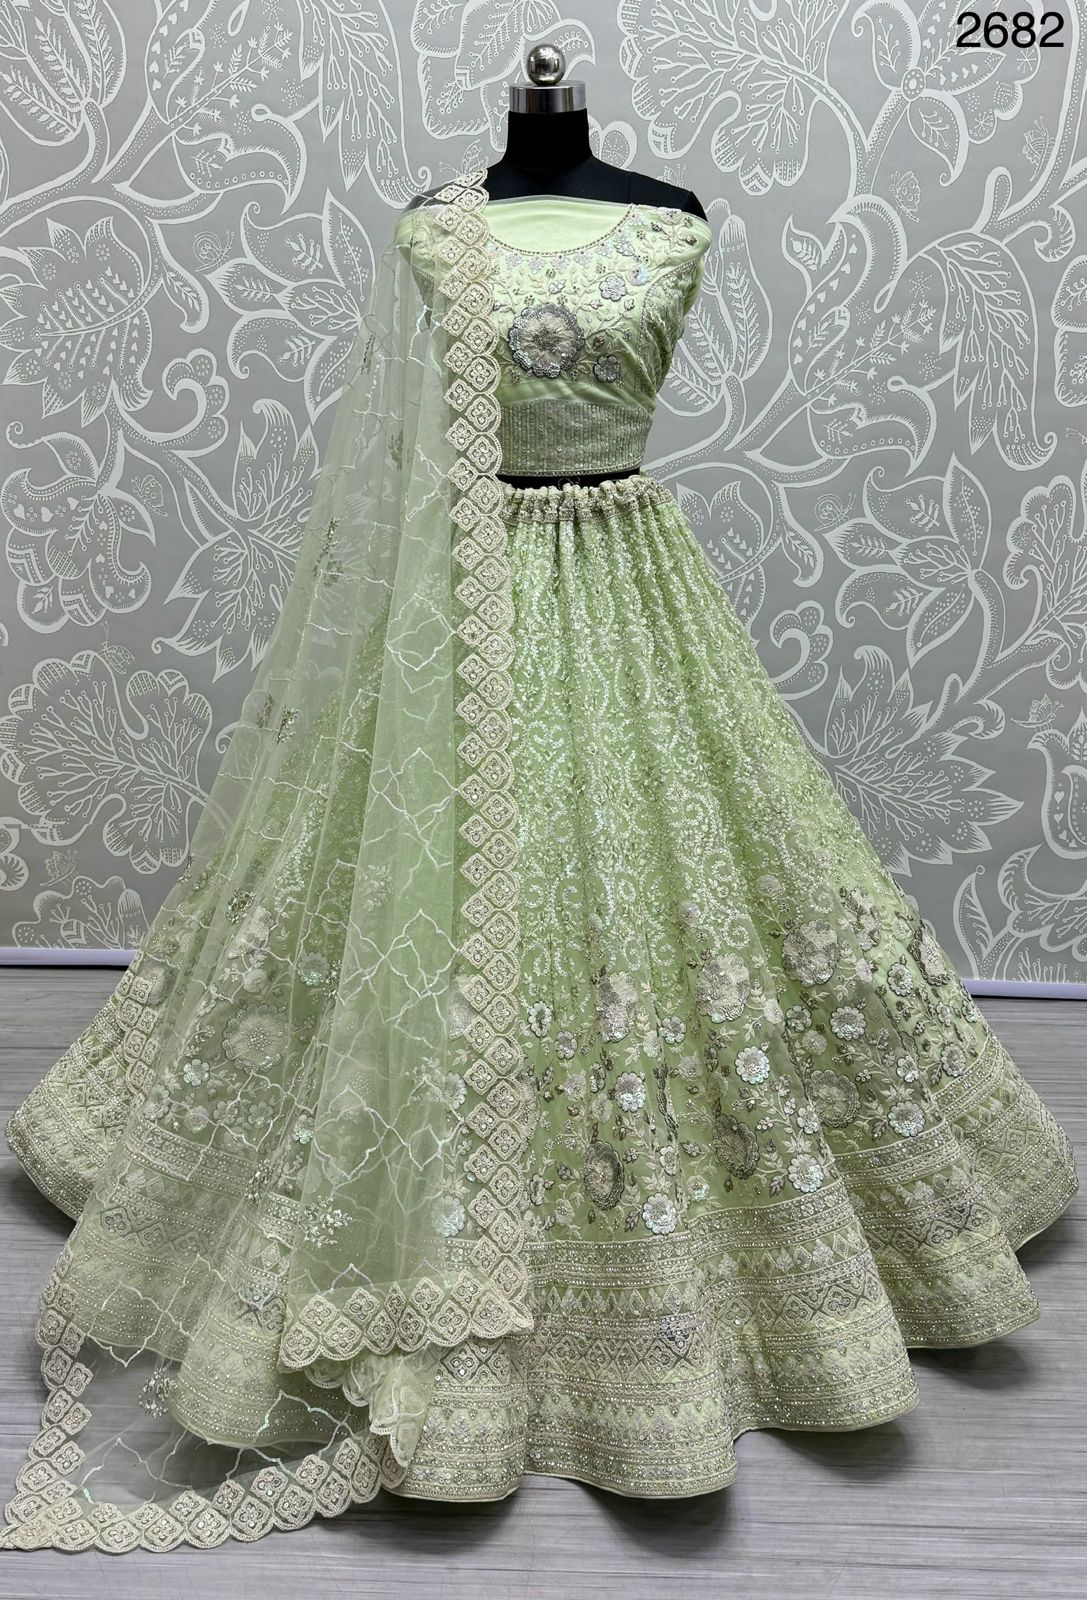 Fancy and Sophisticated Embroidered Designer Party-Wear Lehenga Choli Beautifully Combines Sequins and Dori Work